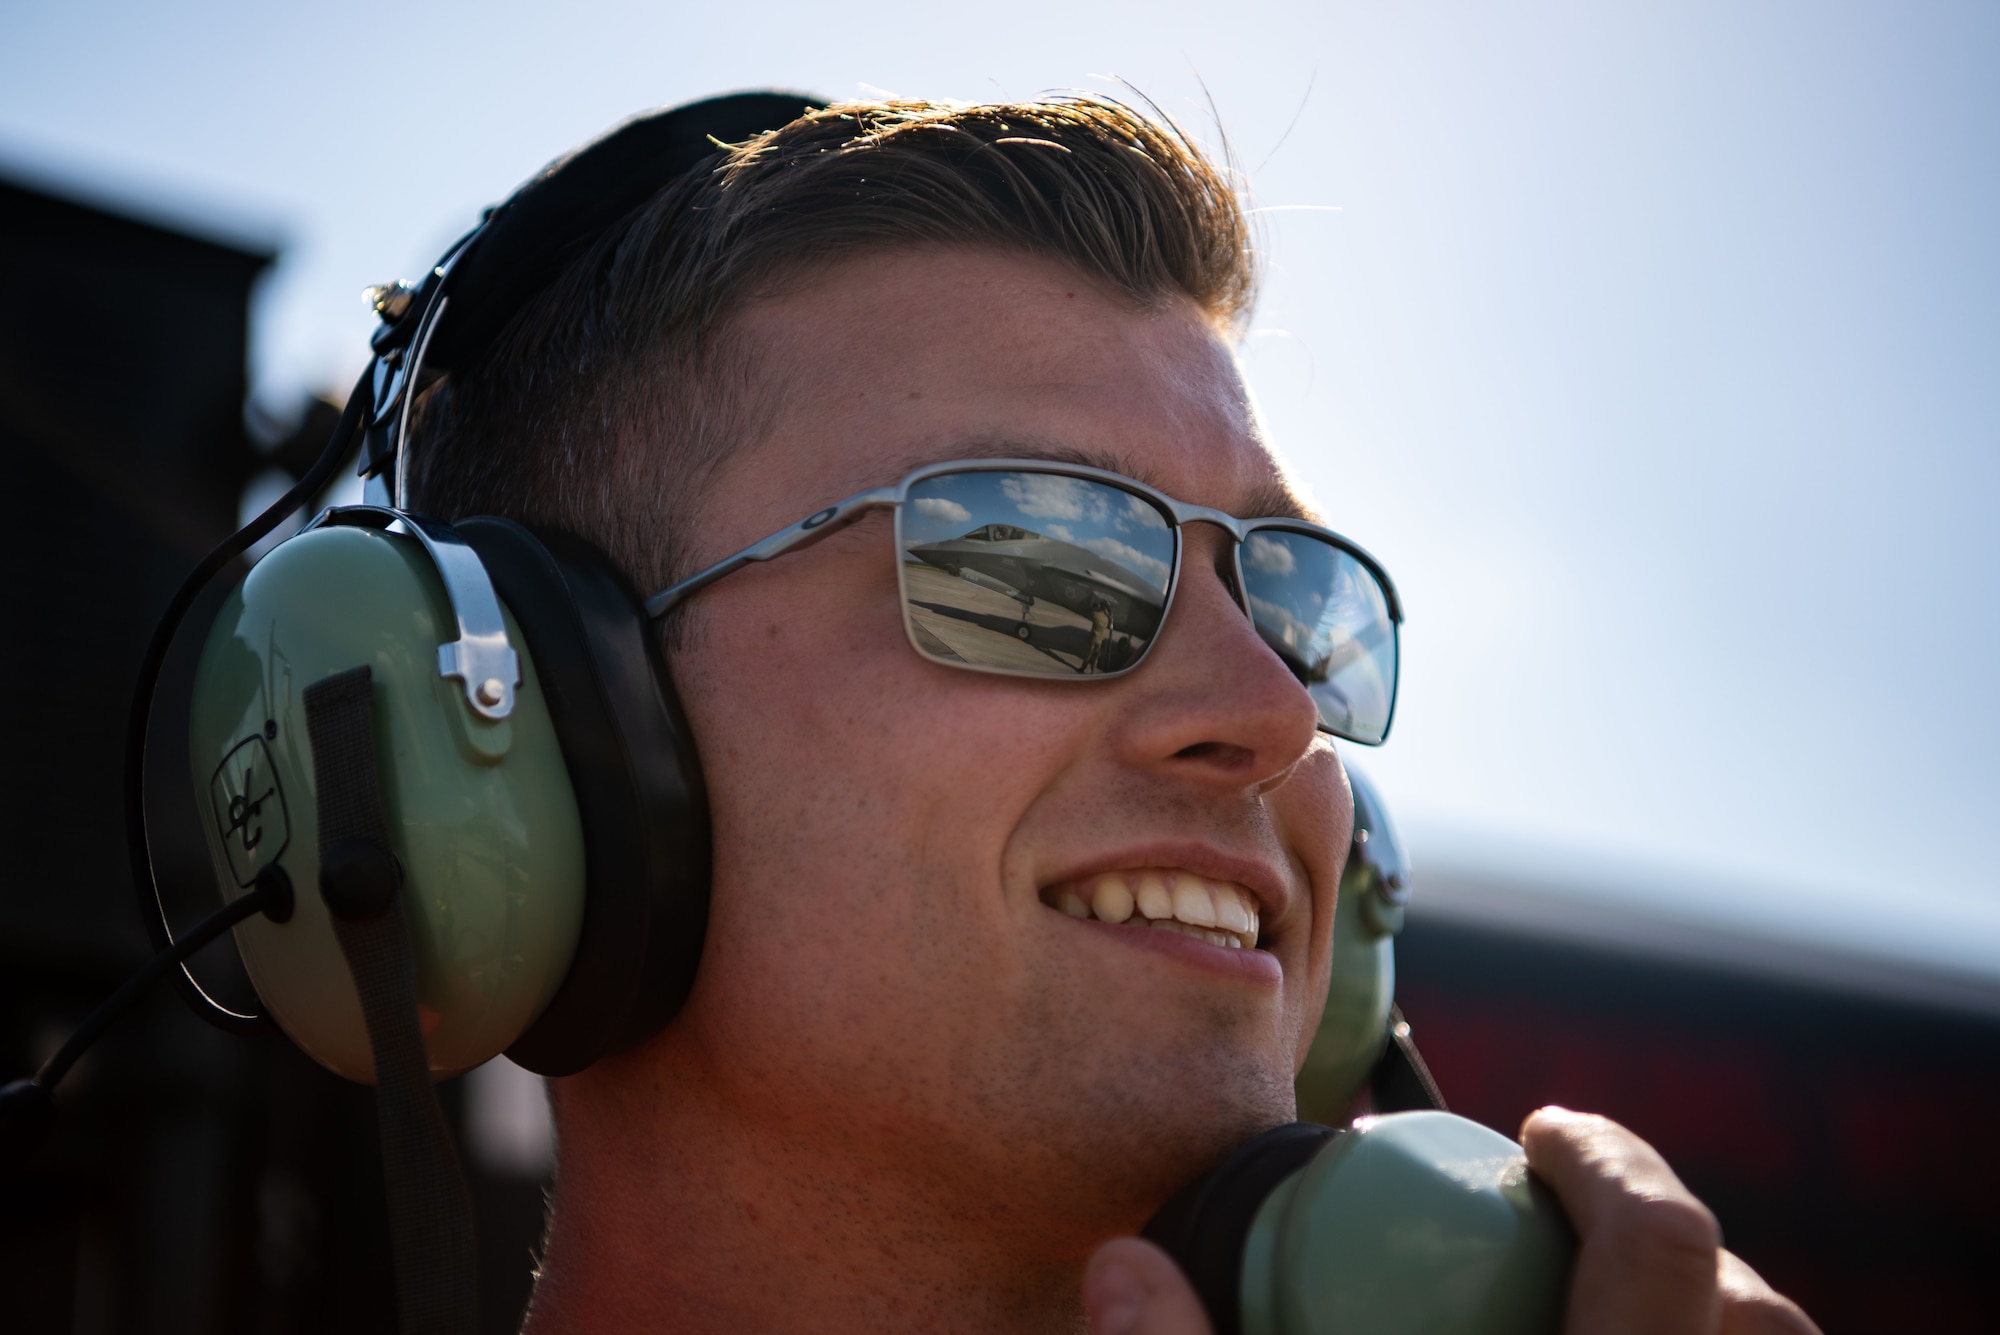 An Airman smiles with a reflection of hot pit refueling a F-35A Lightning II in his sunglasses.